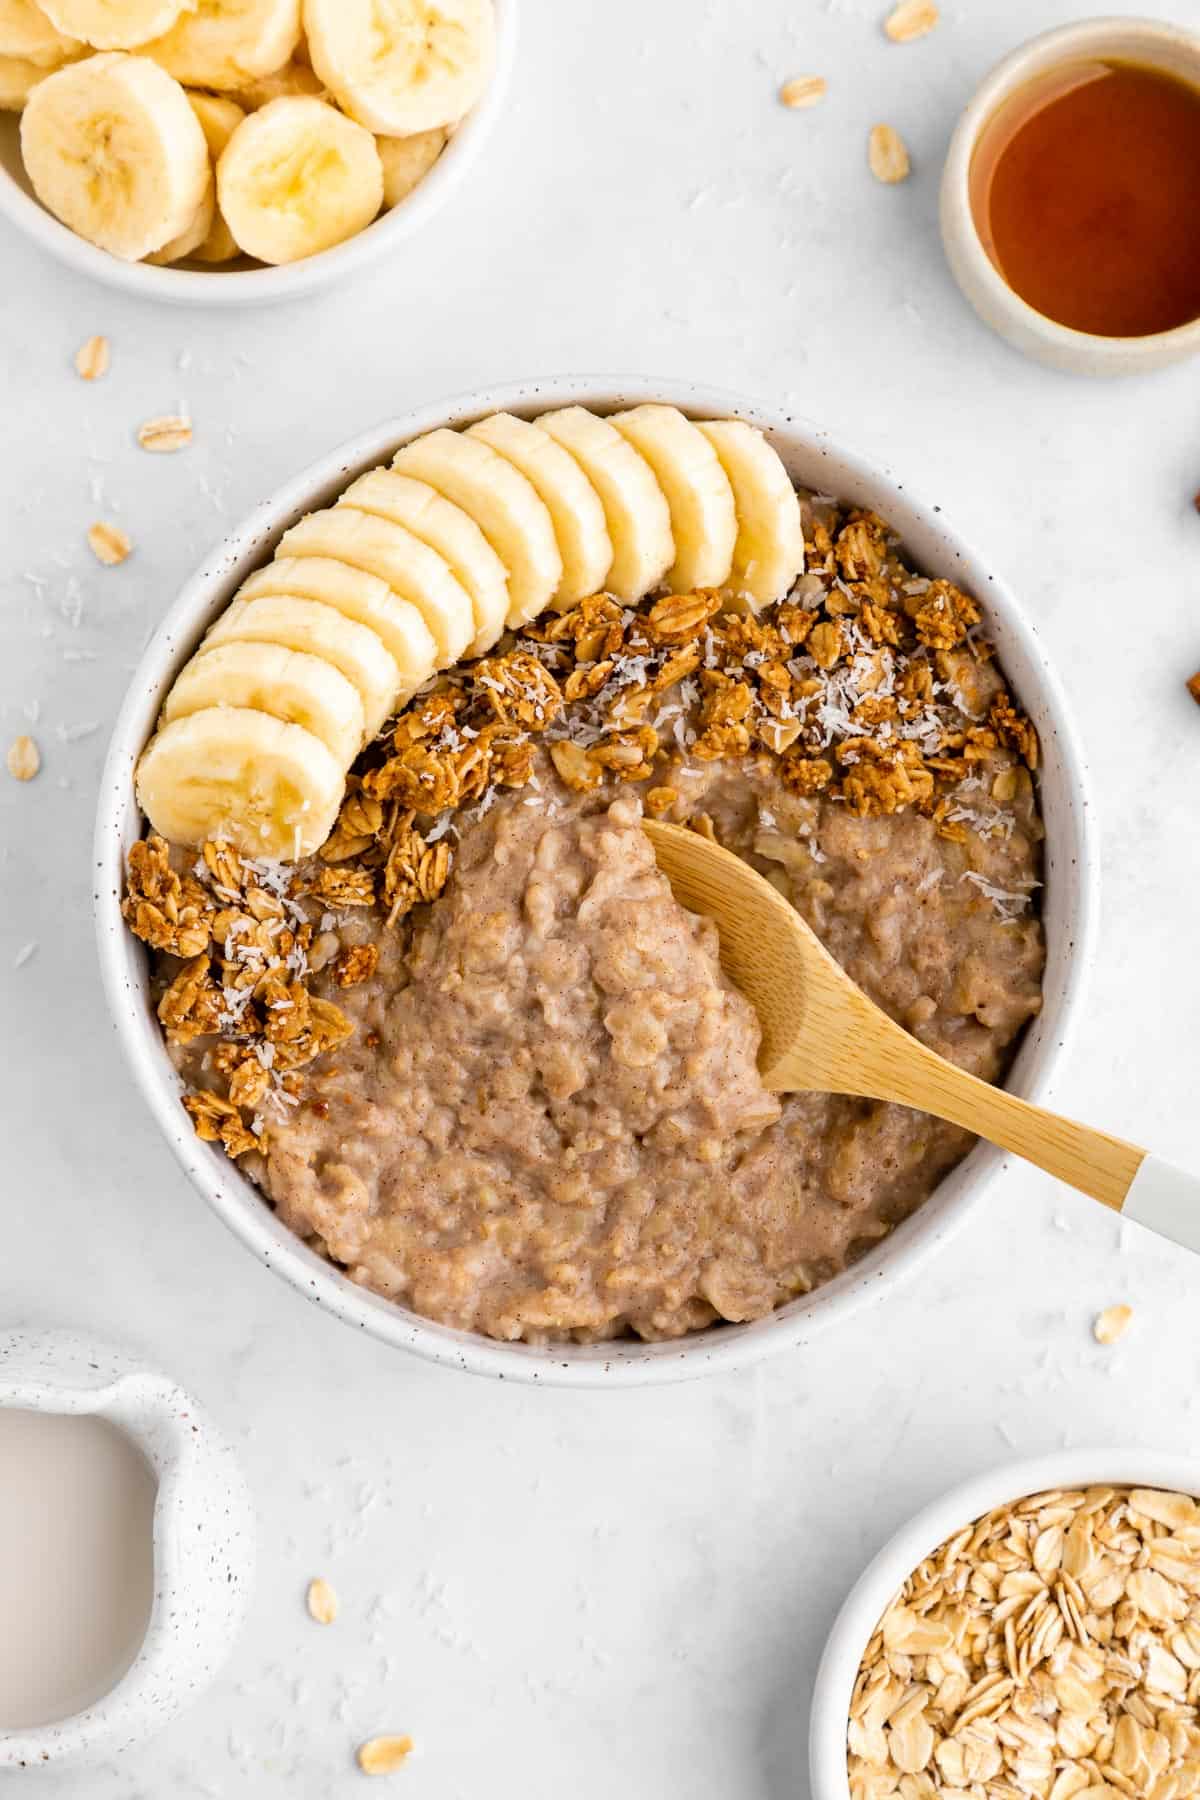 a wooden spoon scooping into a bowl of vegan banana oatmeal surrounded by bowls of rolled oats, sliced banana, almond milk, and maple syrup